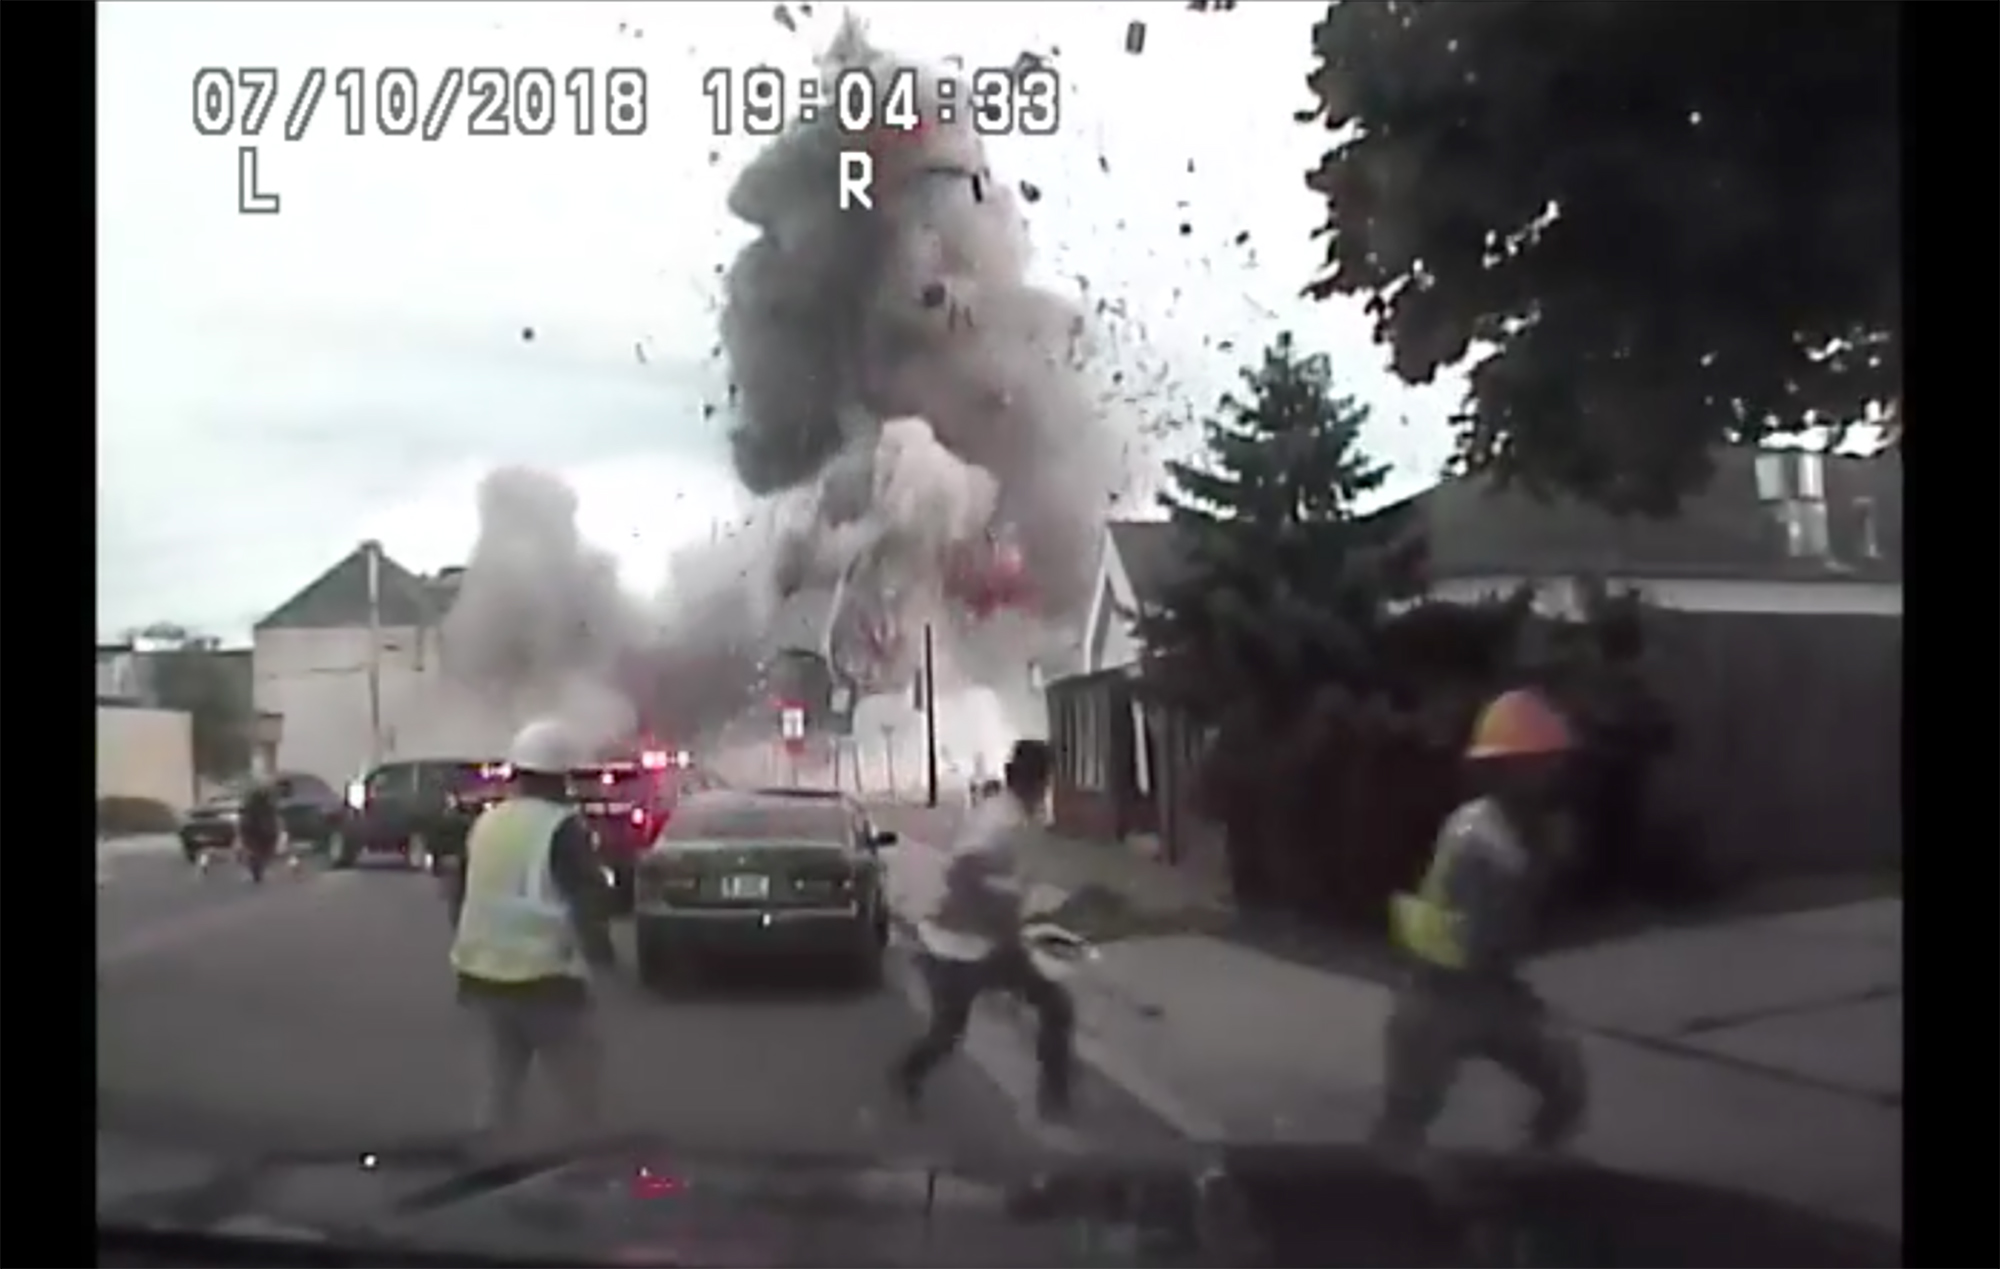 Sun Prairie Police squad video shows the gas explosion